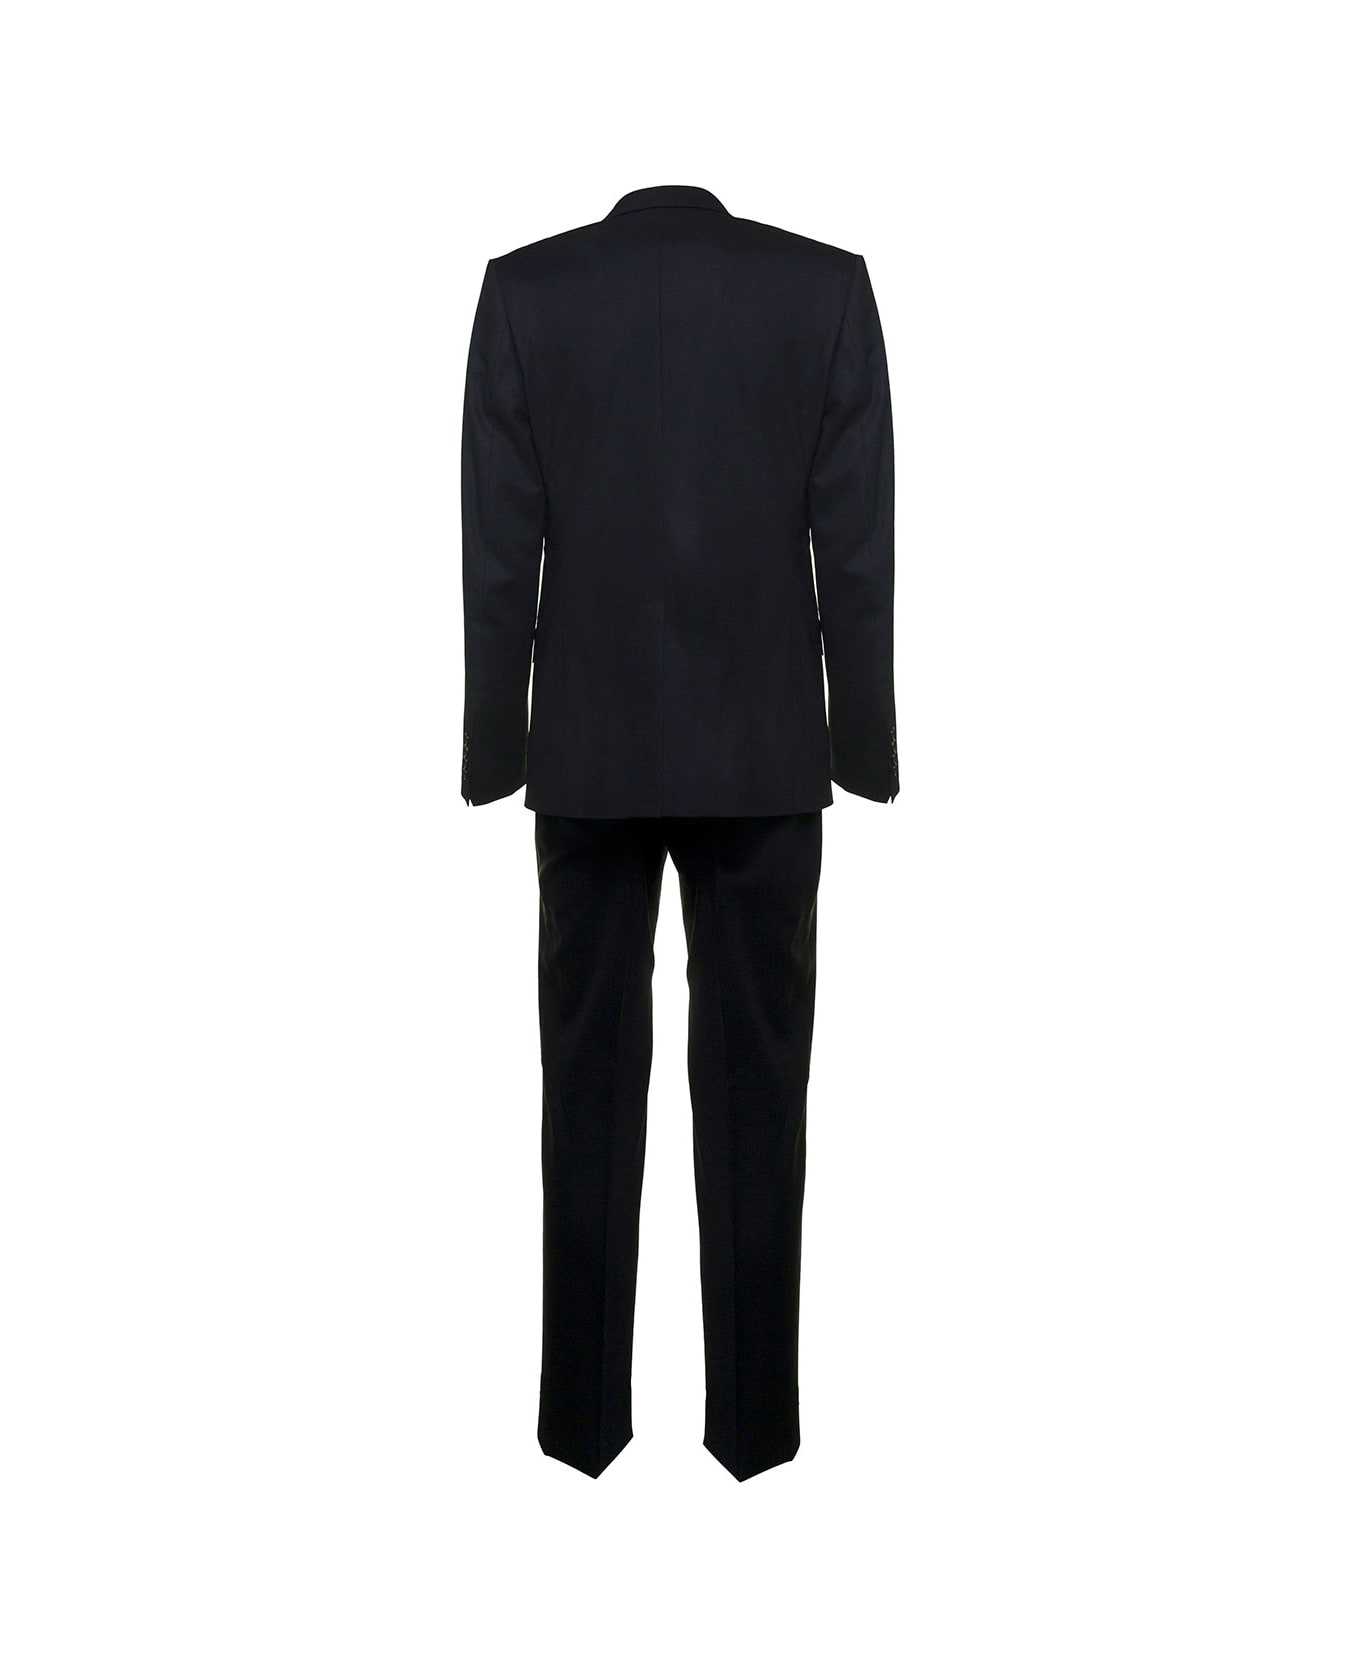 Dolce & Gabbana Man's Single-breasted  Black Wool Tailored Suit - Black